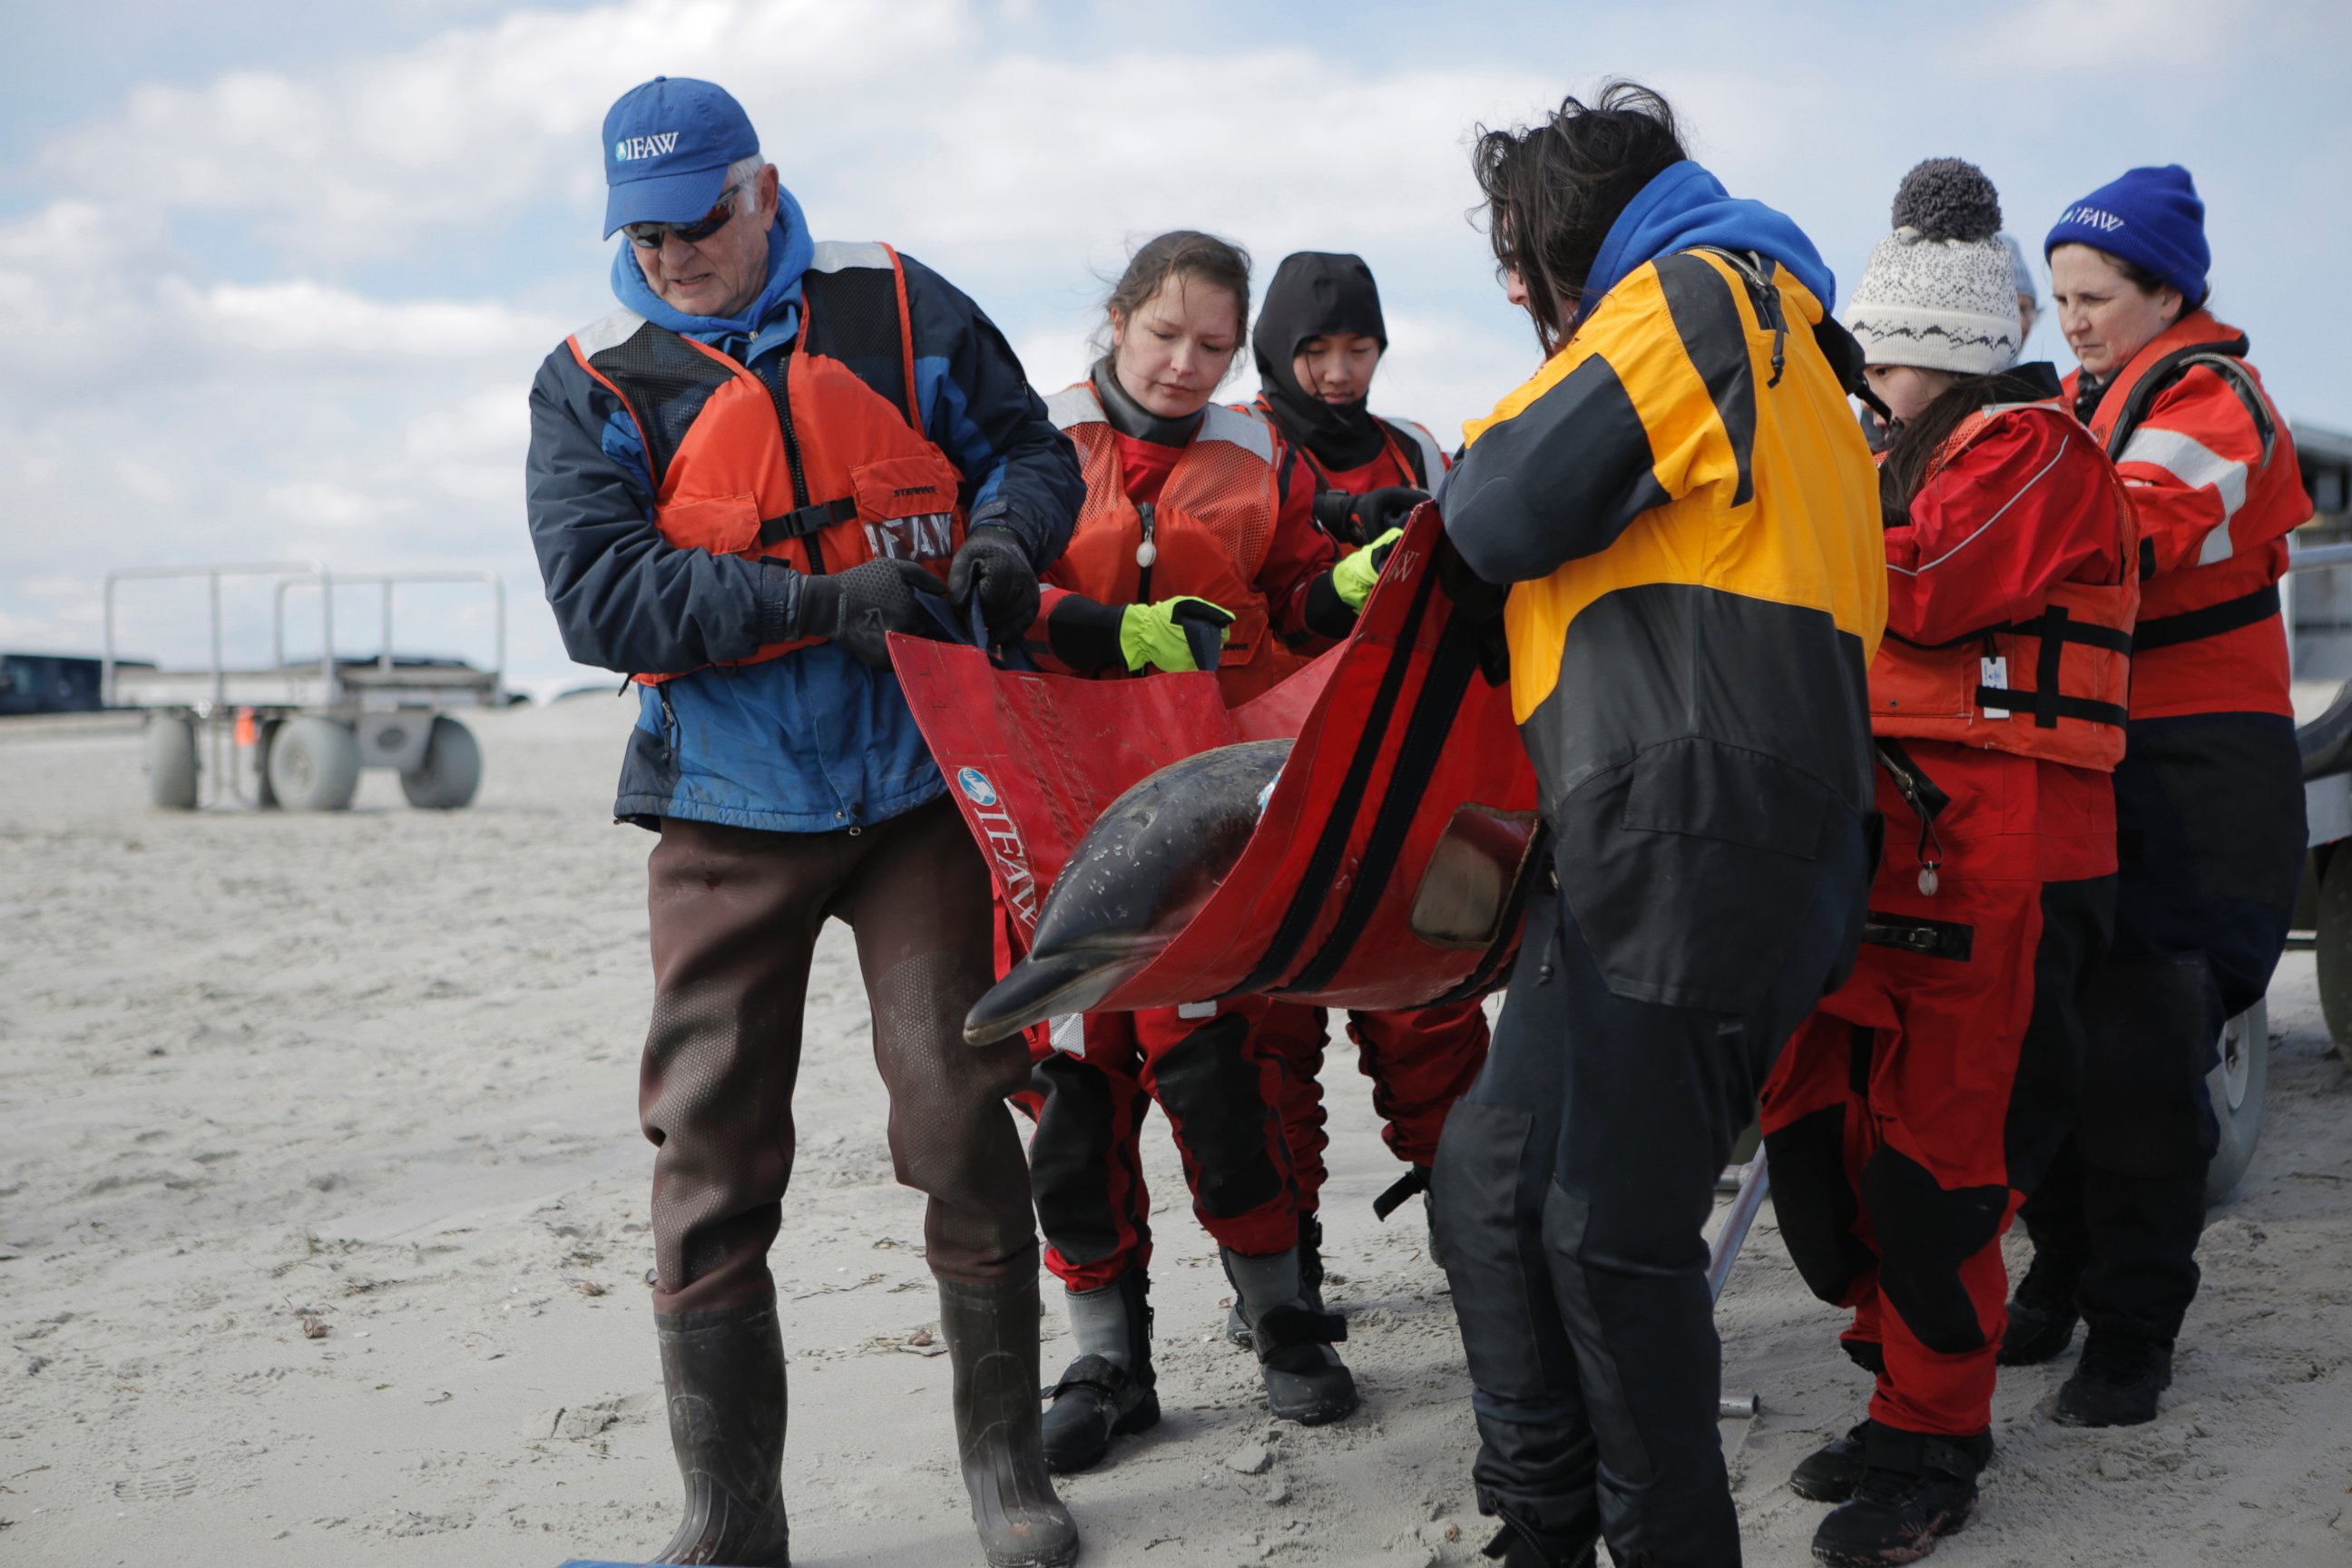 PHOTO: The International Fund for Animal Welfare's Marine Mammal Rescue and Research Team rescued seven dolphins stuck on the mudflats of the Herring River in Wellfleet, Mass., March 3, 2017.